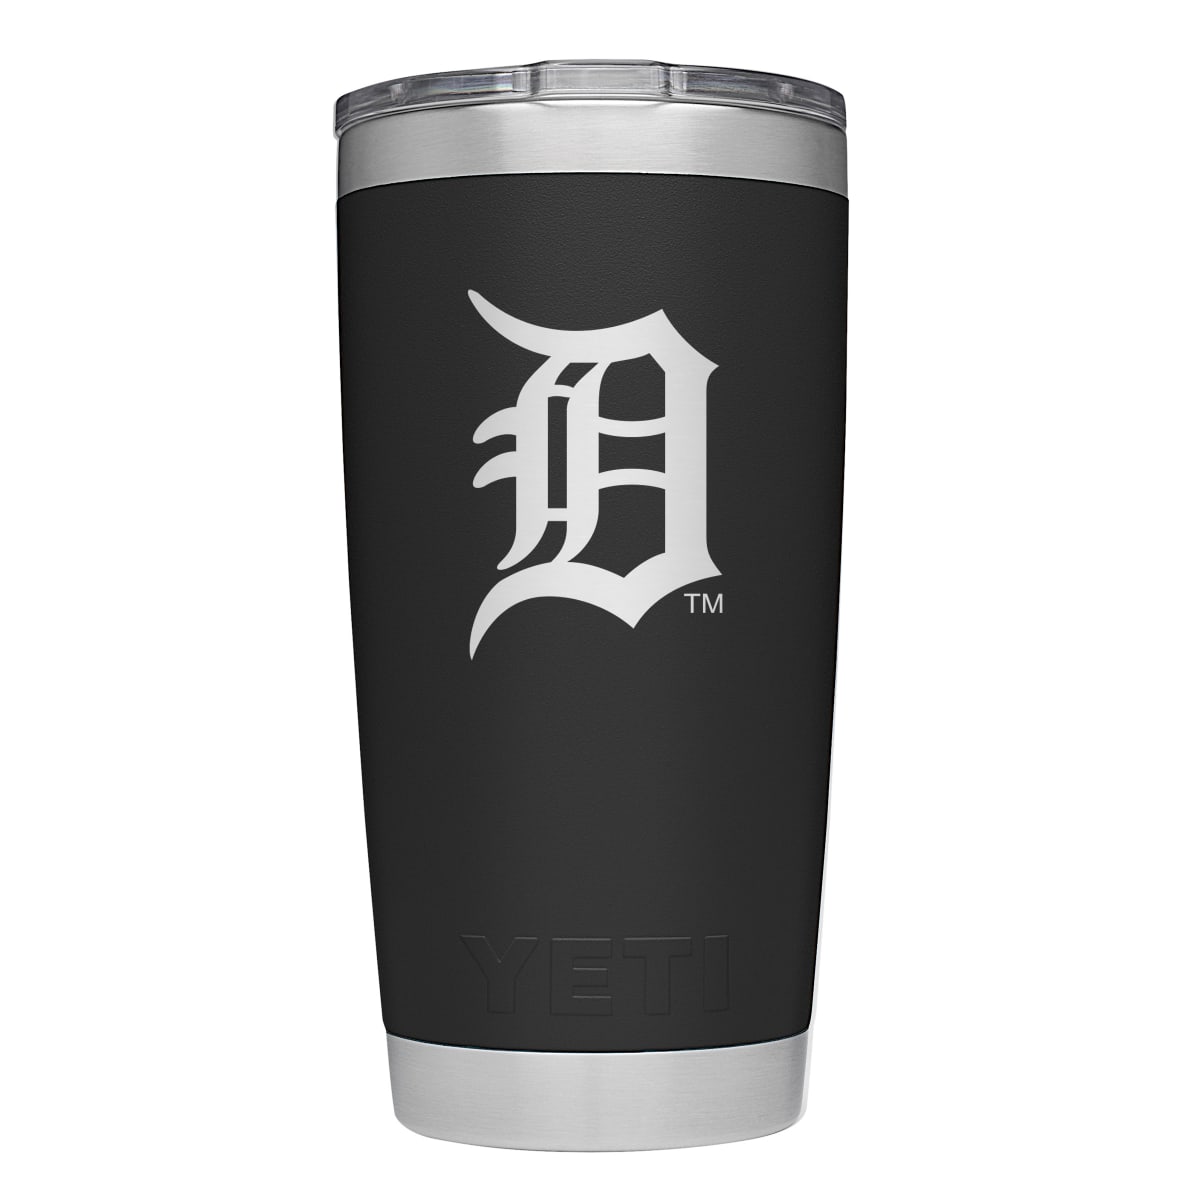 Baltimore Orioles custom Coolers and Drinkware from YETI, where to